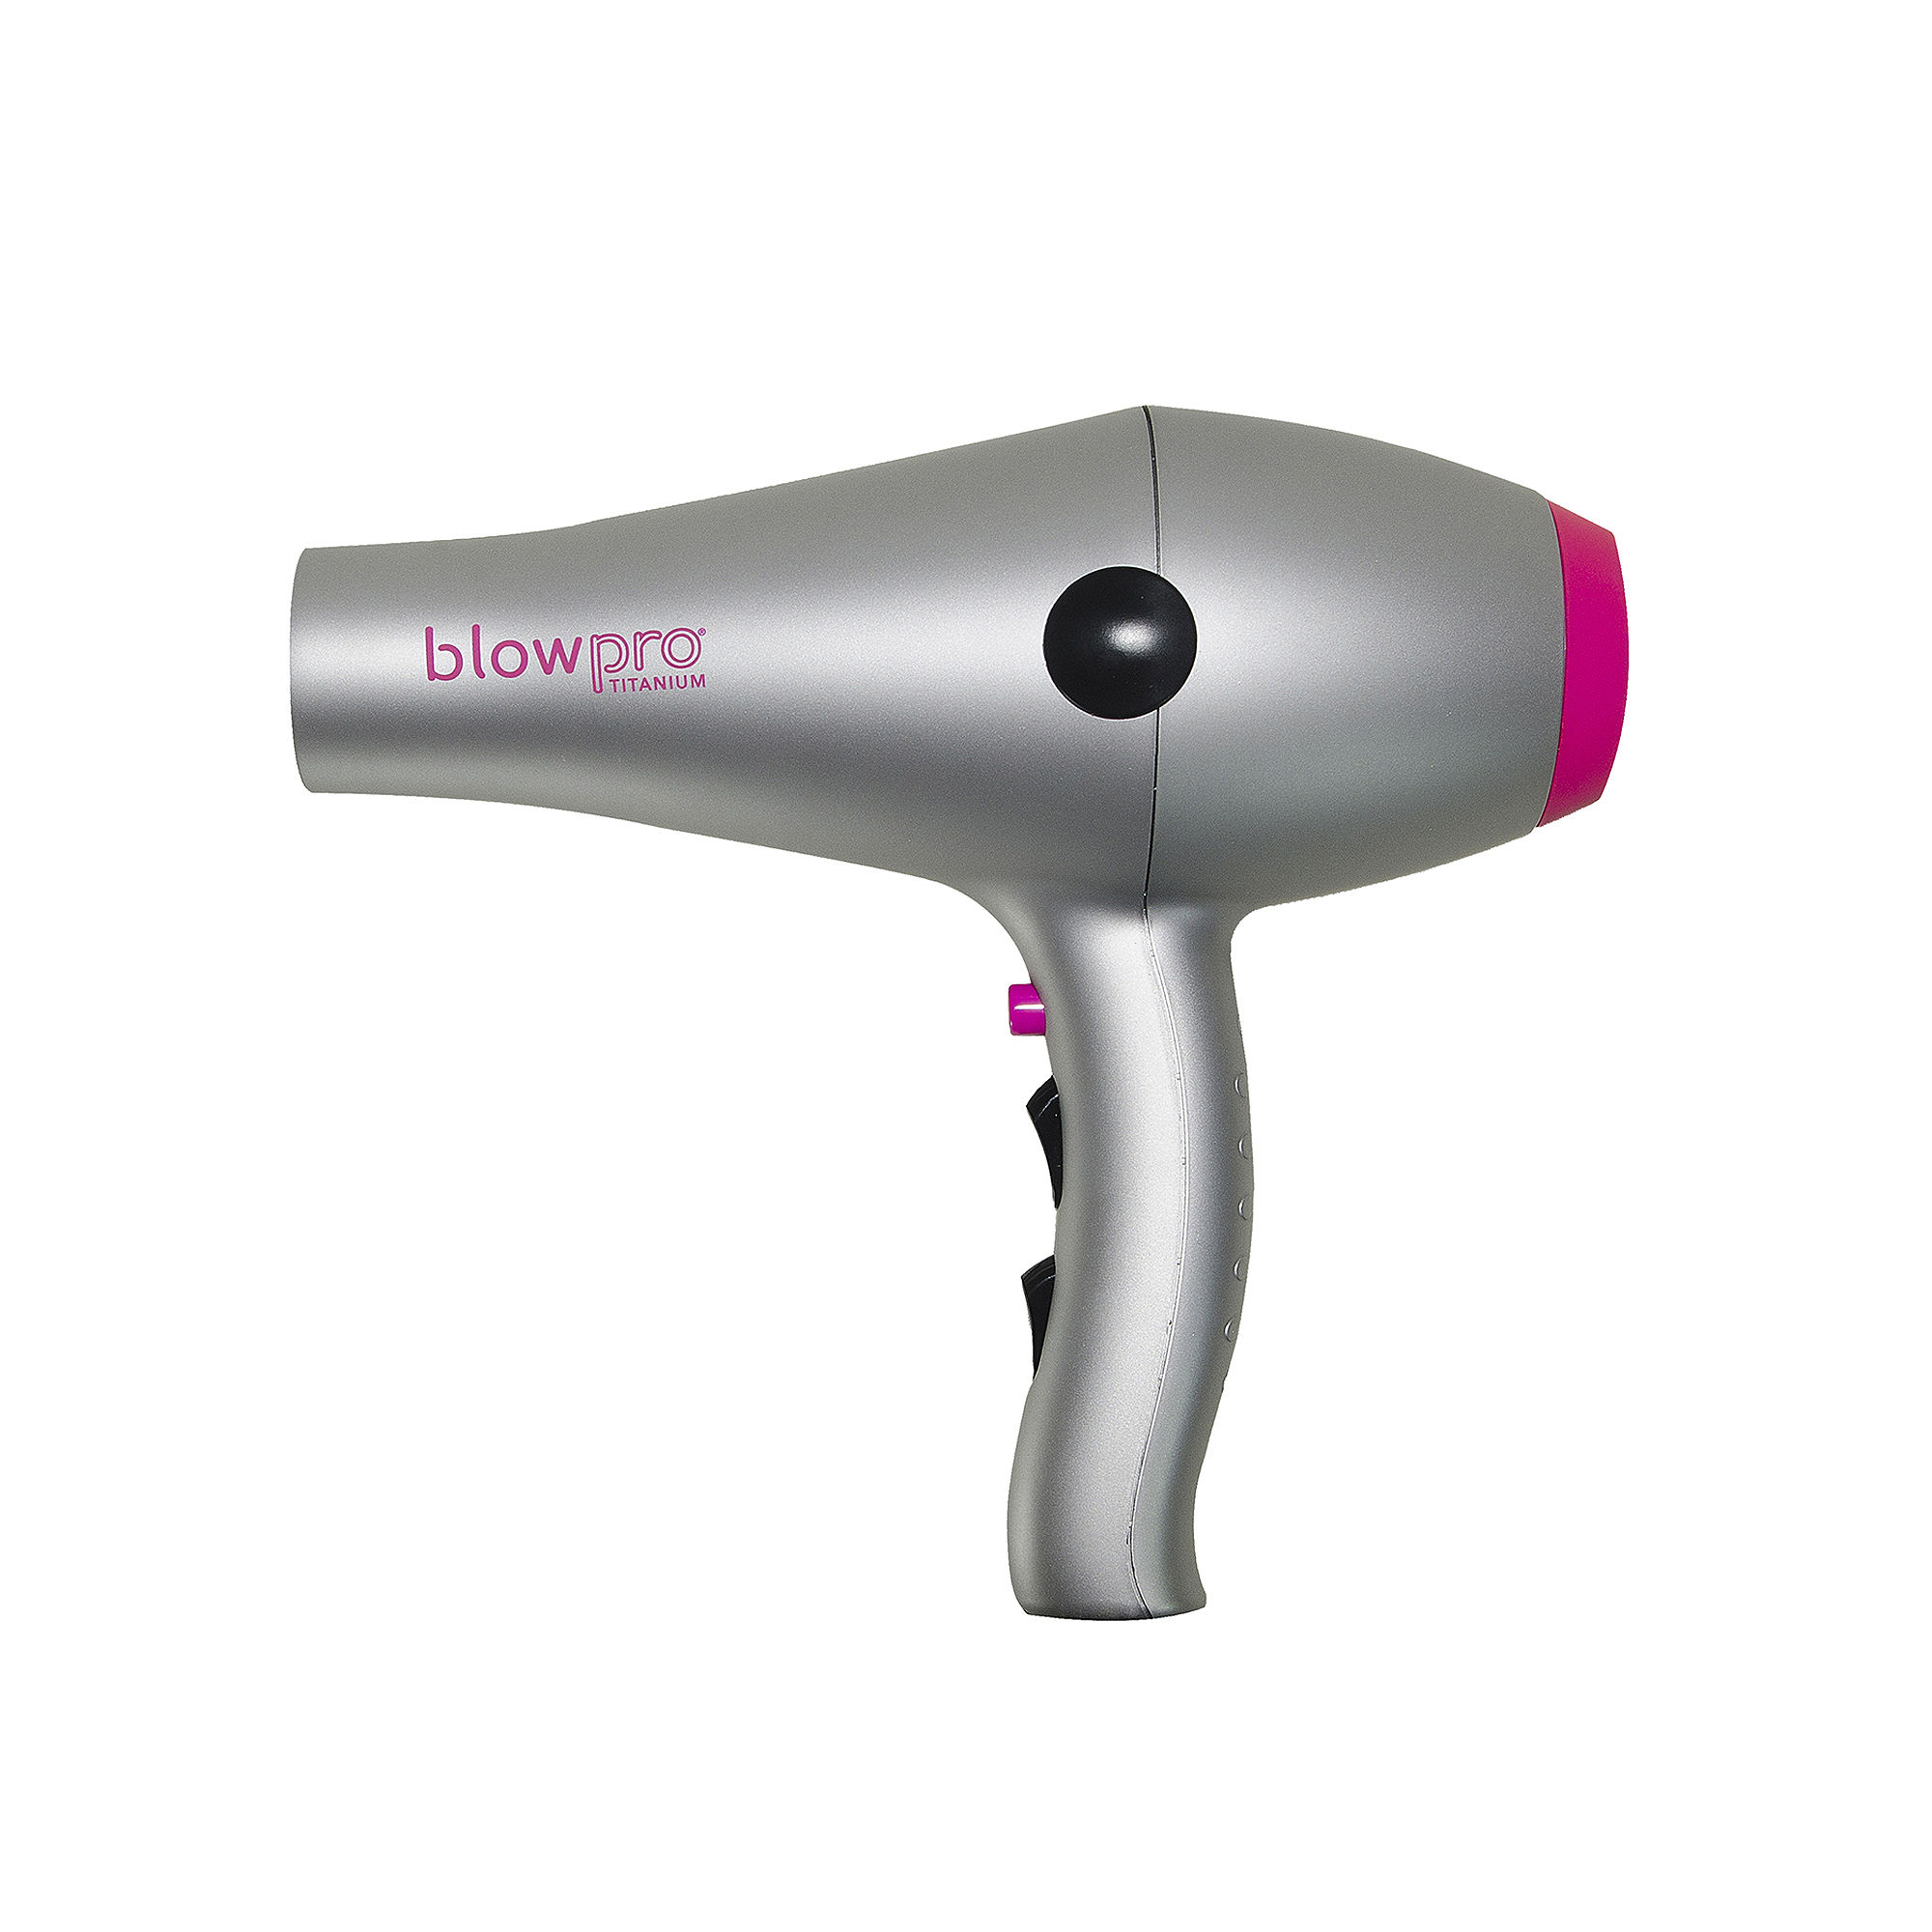 blowpro Titanium Professional Hair Dryer + 3-pc. Travel-Sized Products